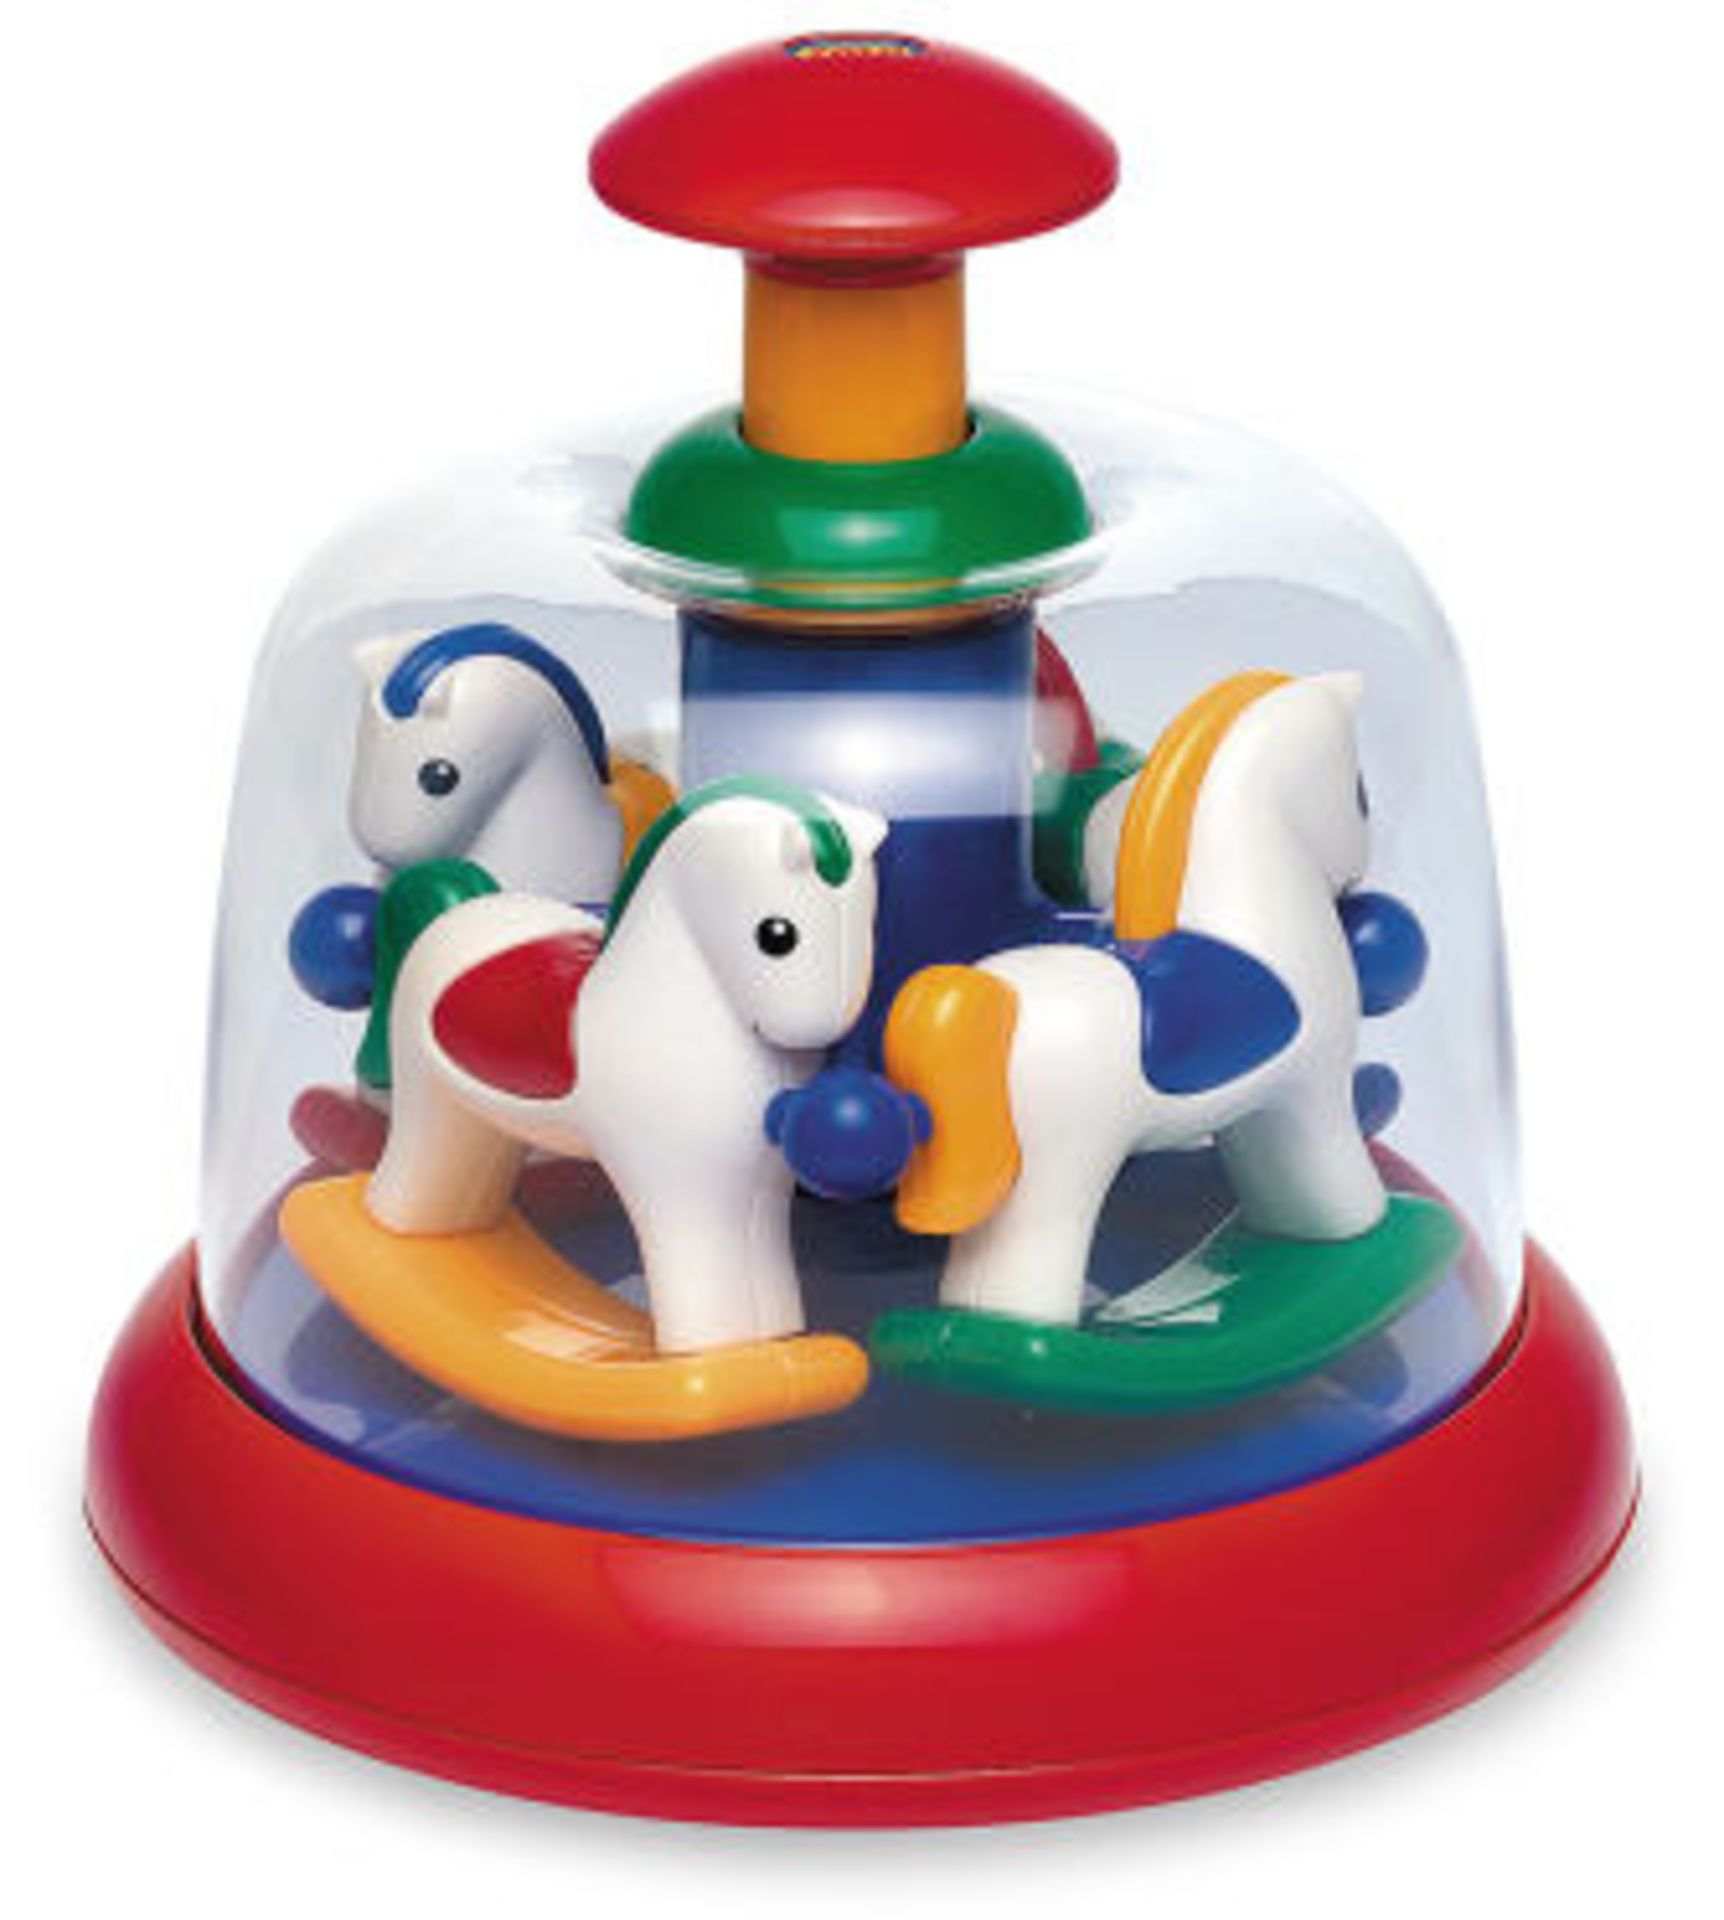 V Brand New Tolo Baby Carousel Age 6mths+ ISP £13.44 (Kidits.co.uk) X 2 YOUR BID PRICE TO BE